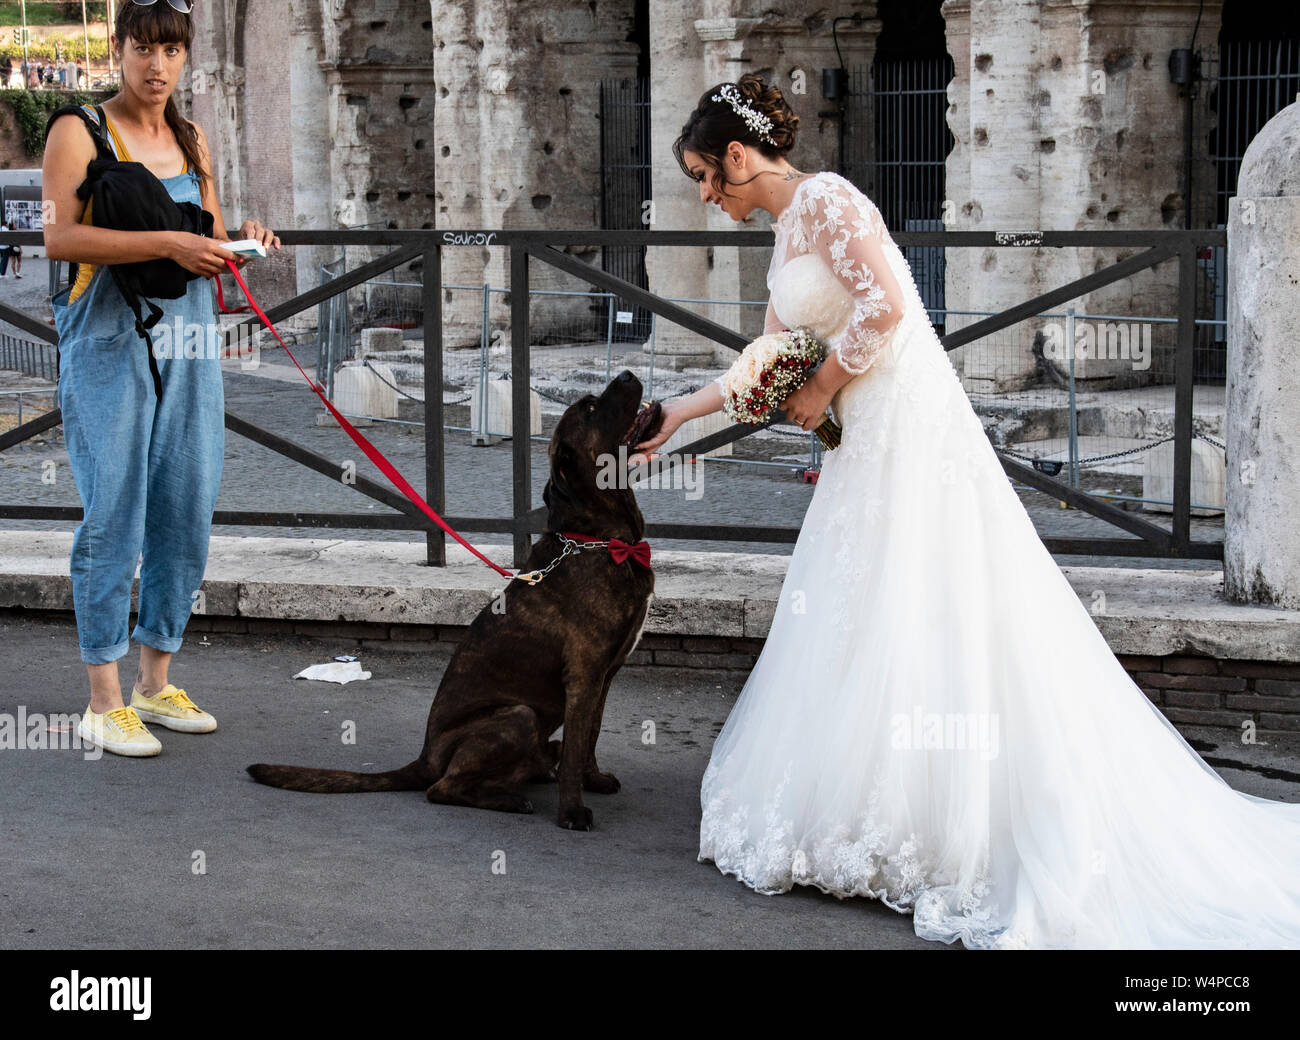 Bride in bridal gown pats her dog outside the Coliseum in Rome, Italy Stock Photo